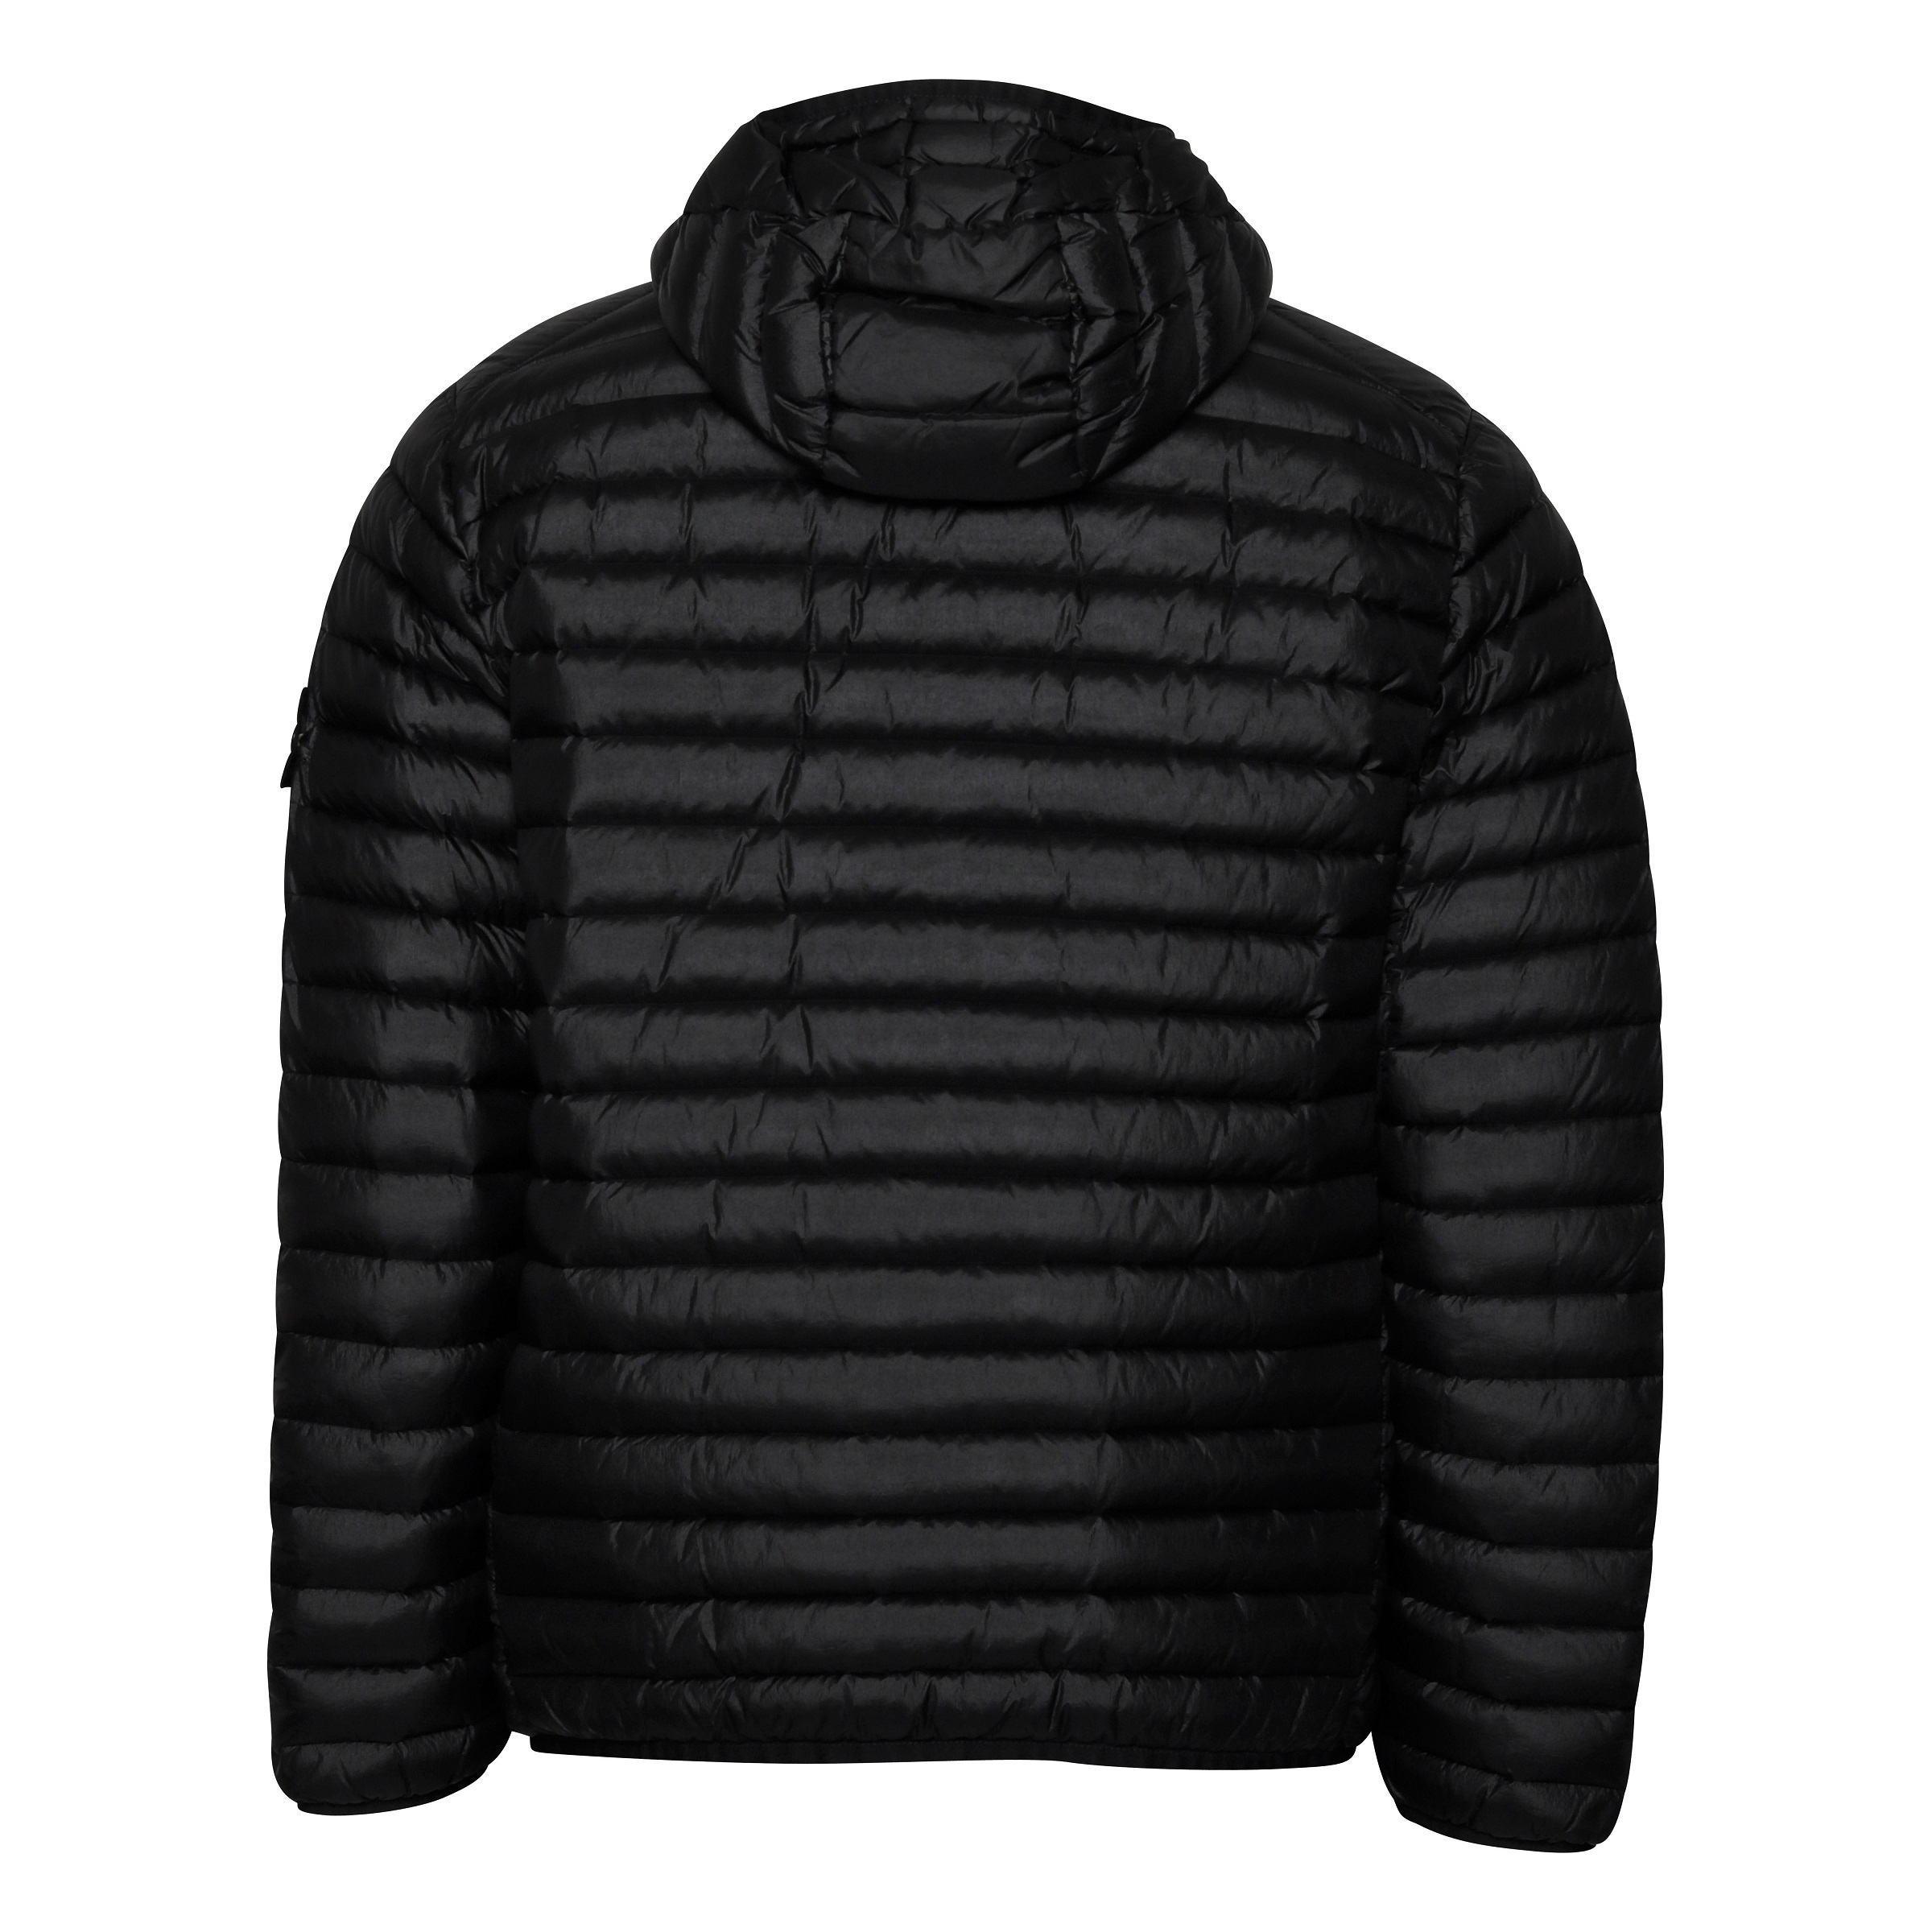 Stone Island Hooded Real Down Jacket in Black 2XL